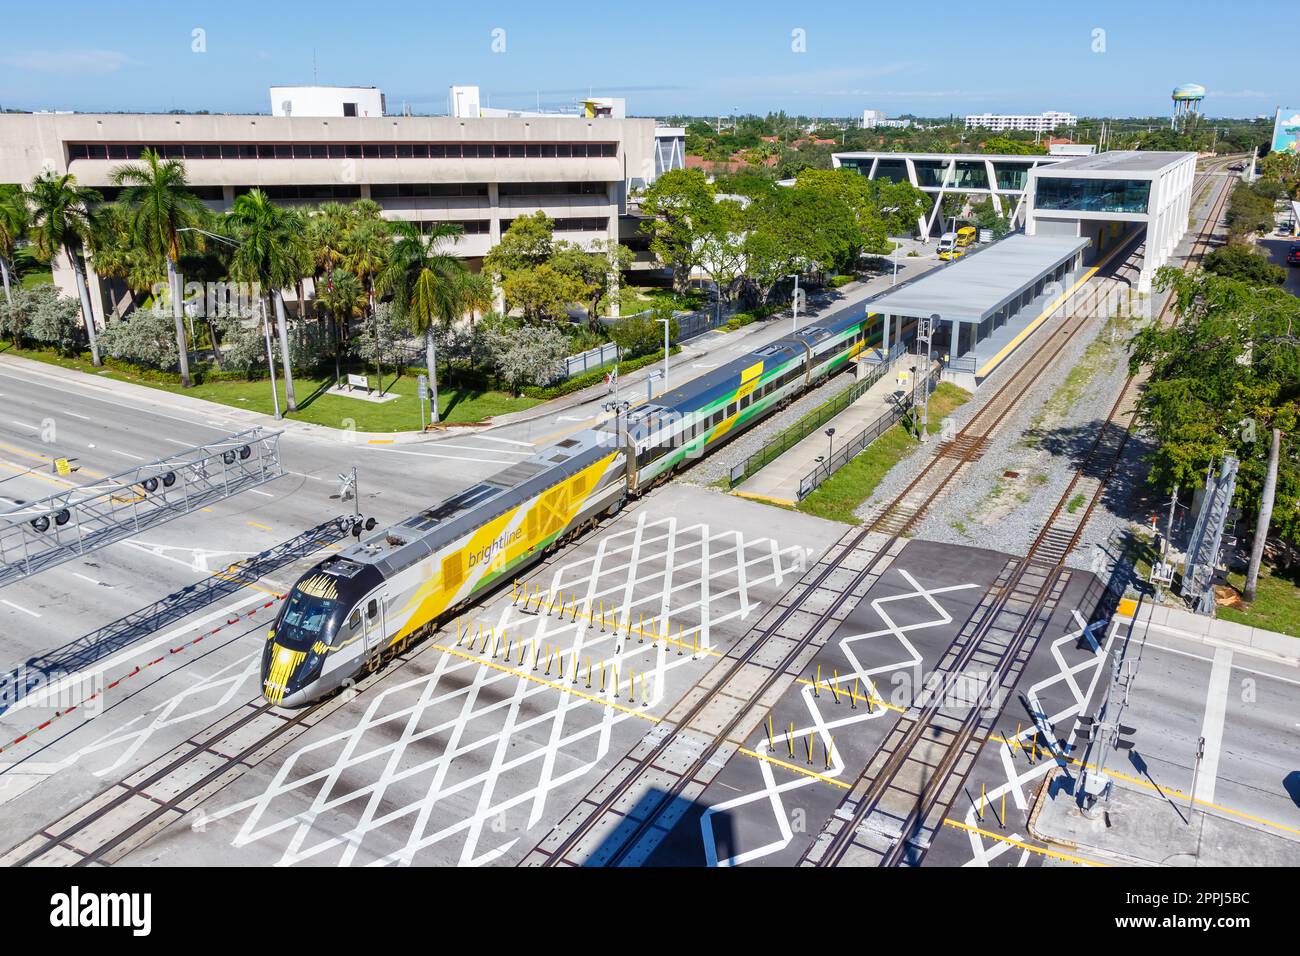 Brightline private inter-city rail train at Fort Lauderdale railway station in Florida, United States Stock Photo